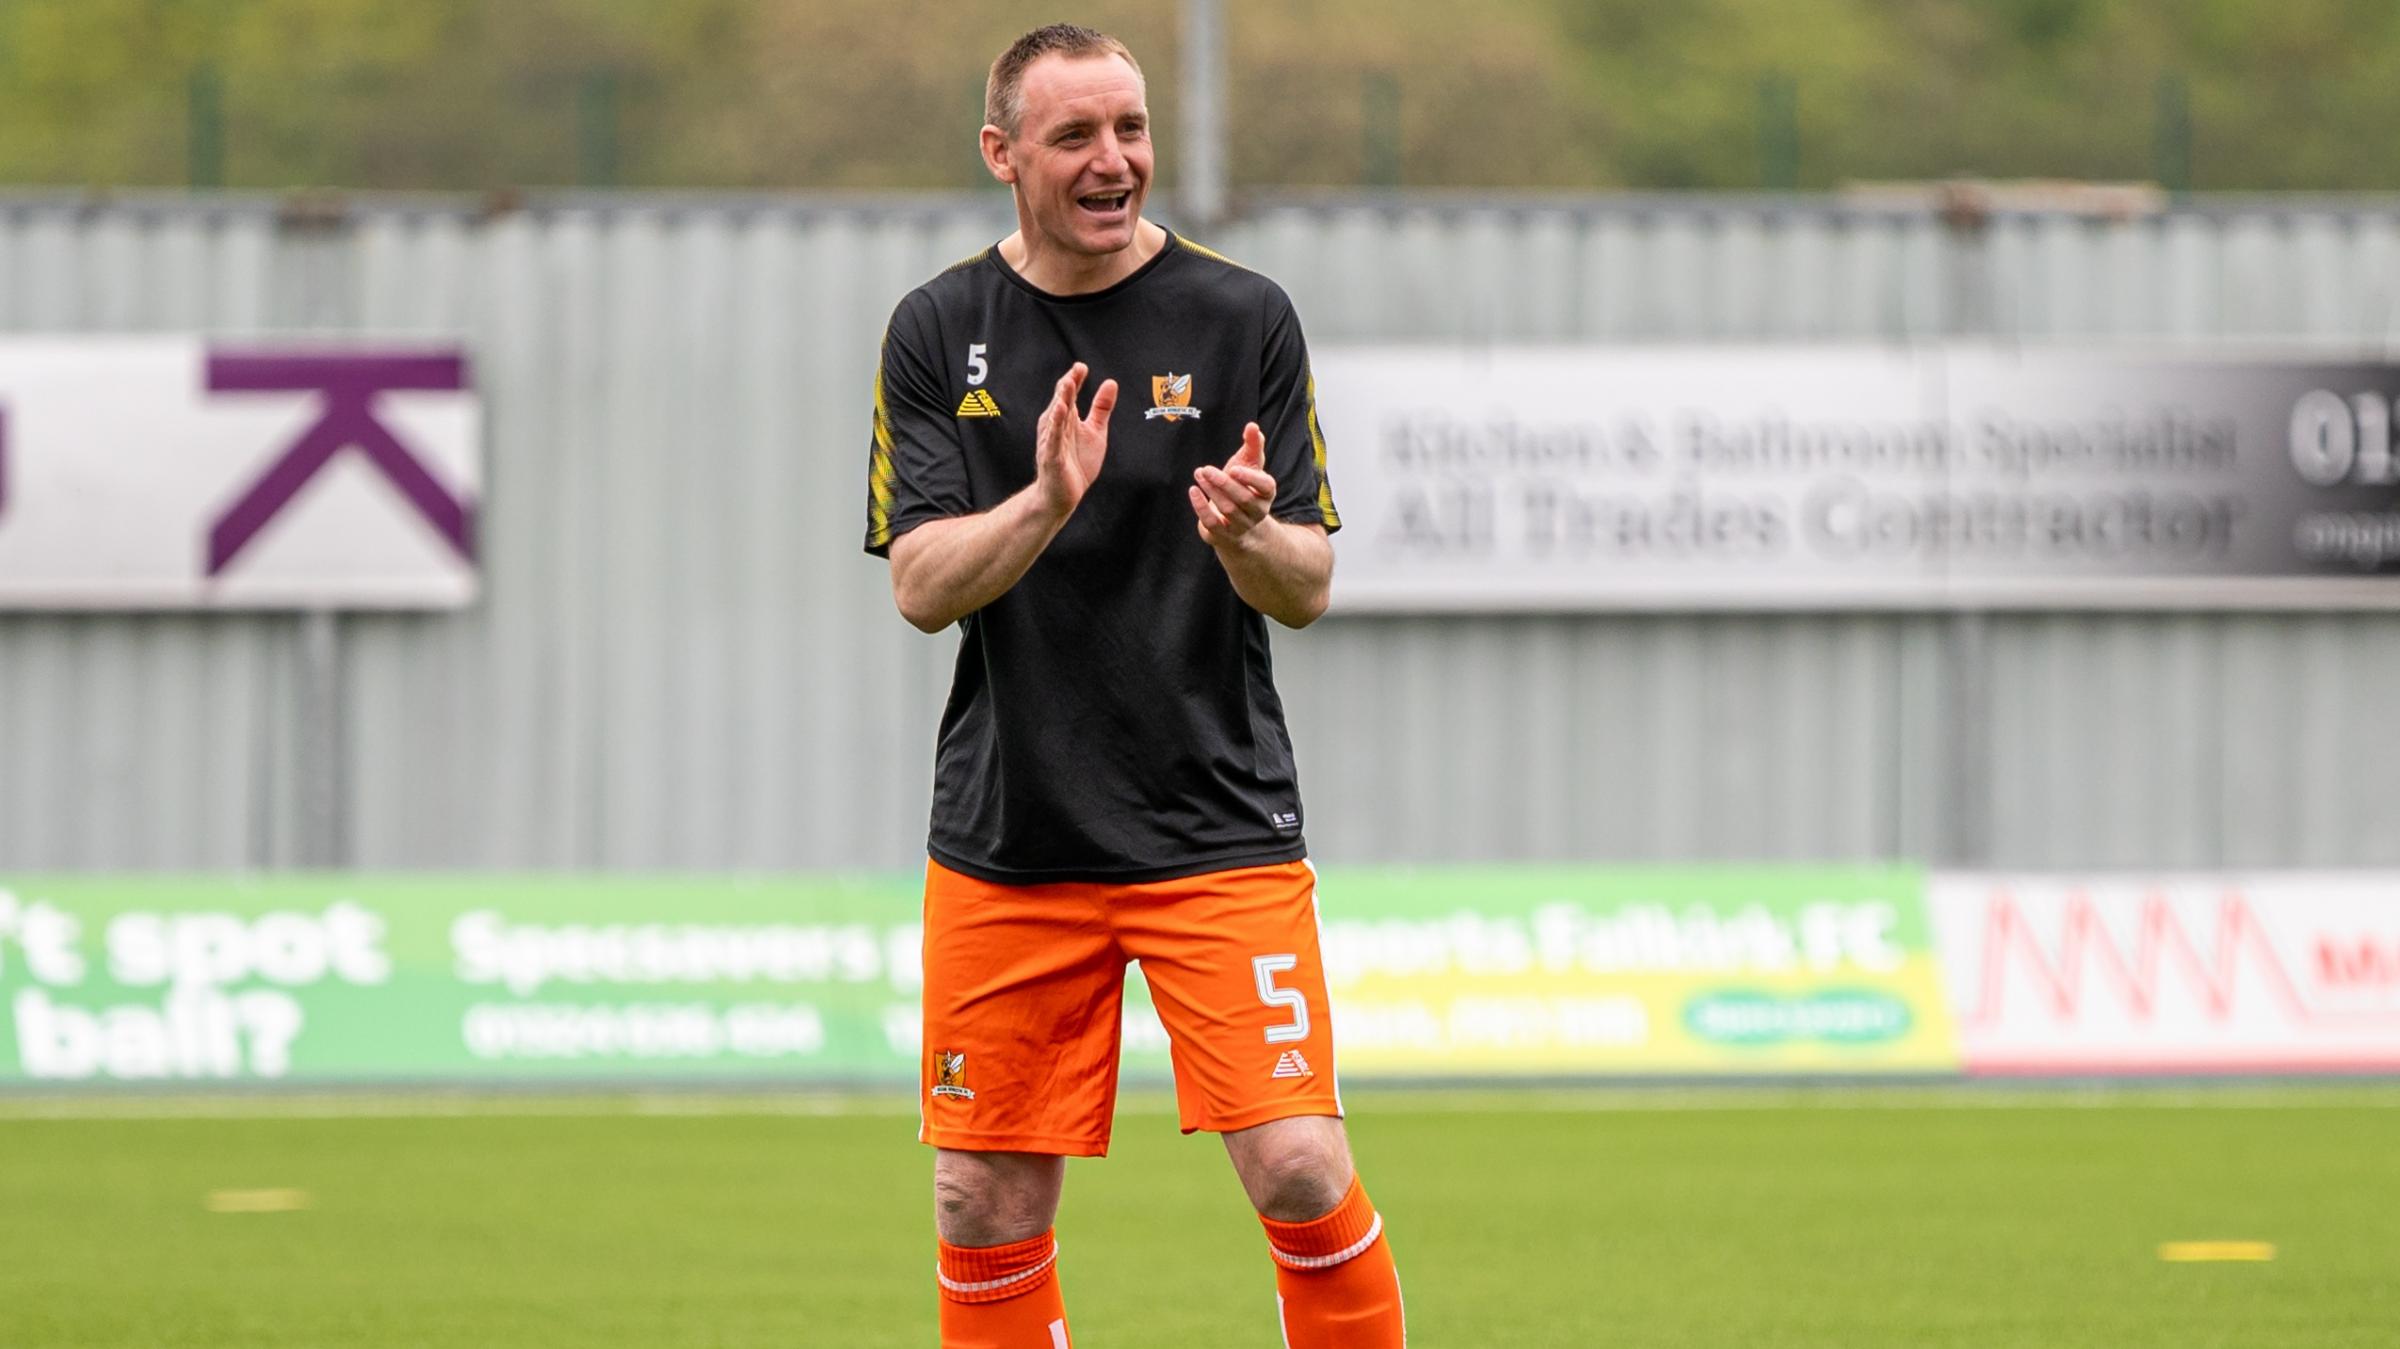 Andy Graham to remain as Alloa Athletic player next season